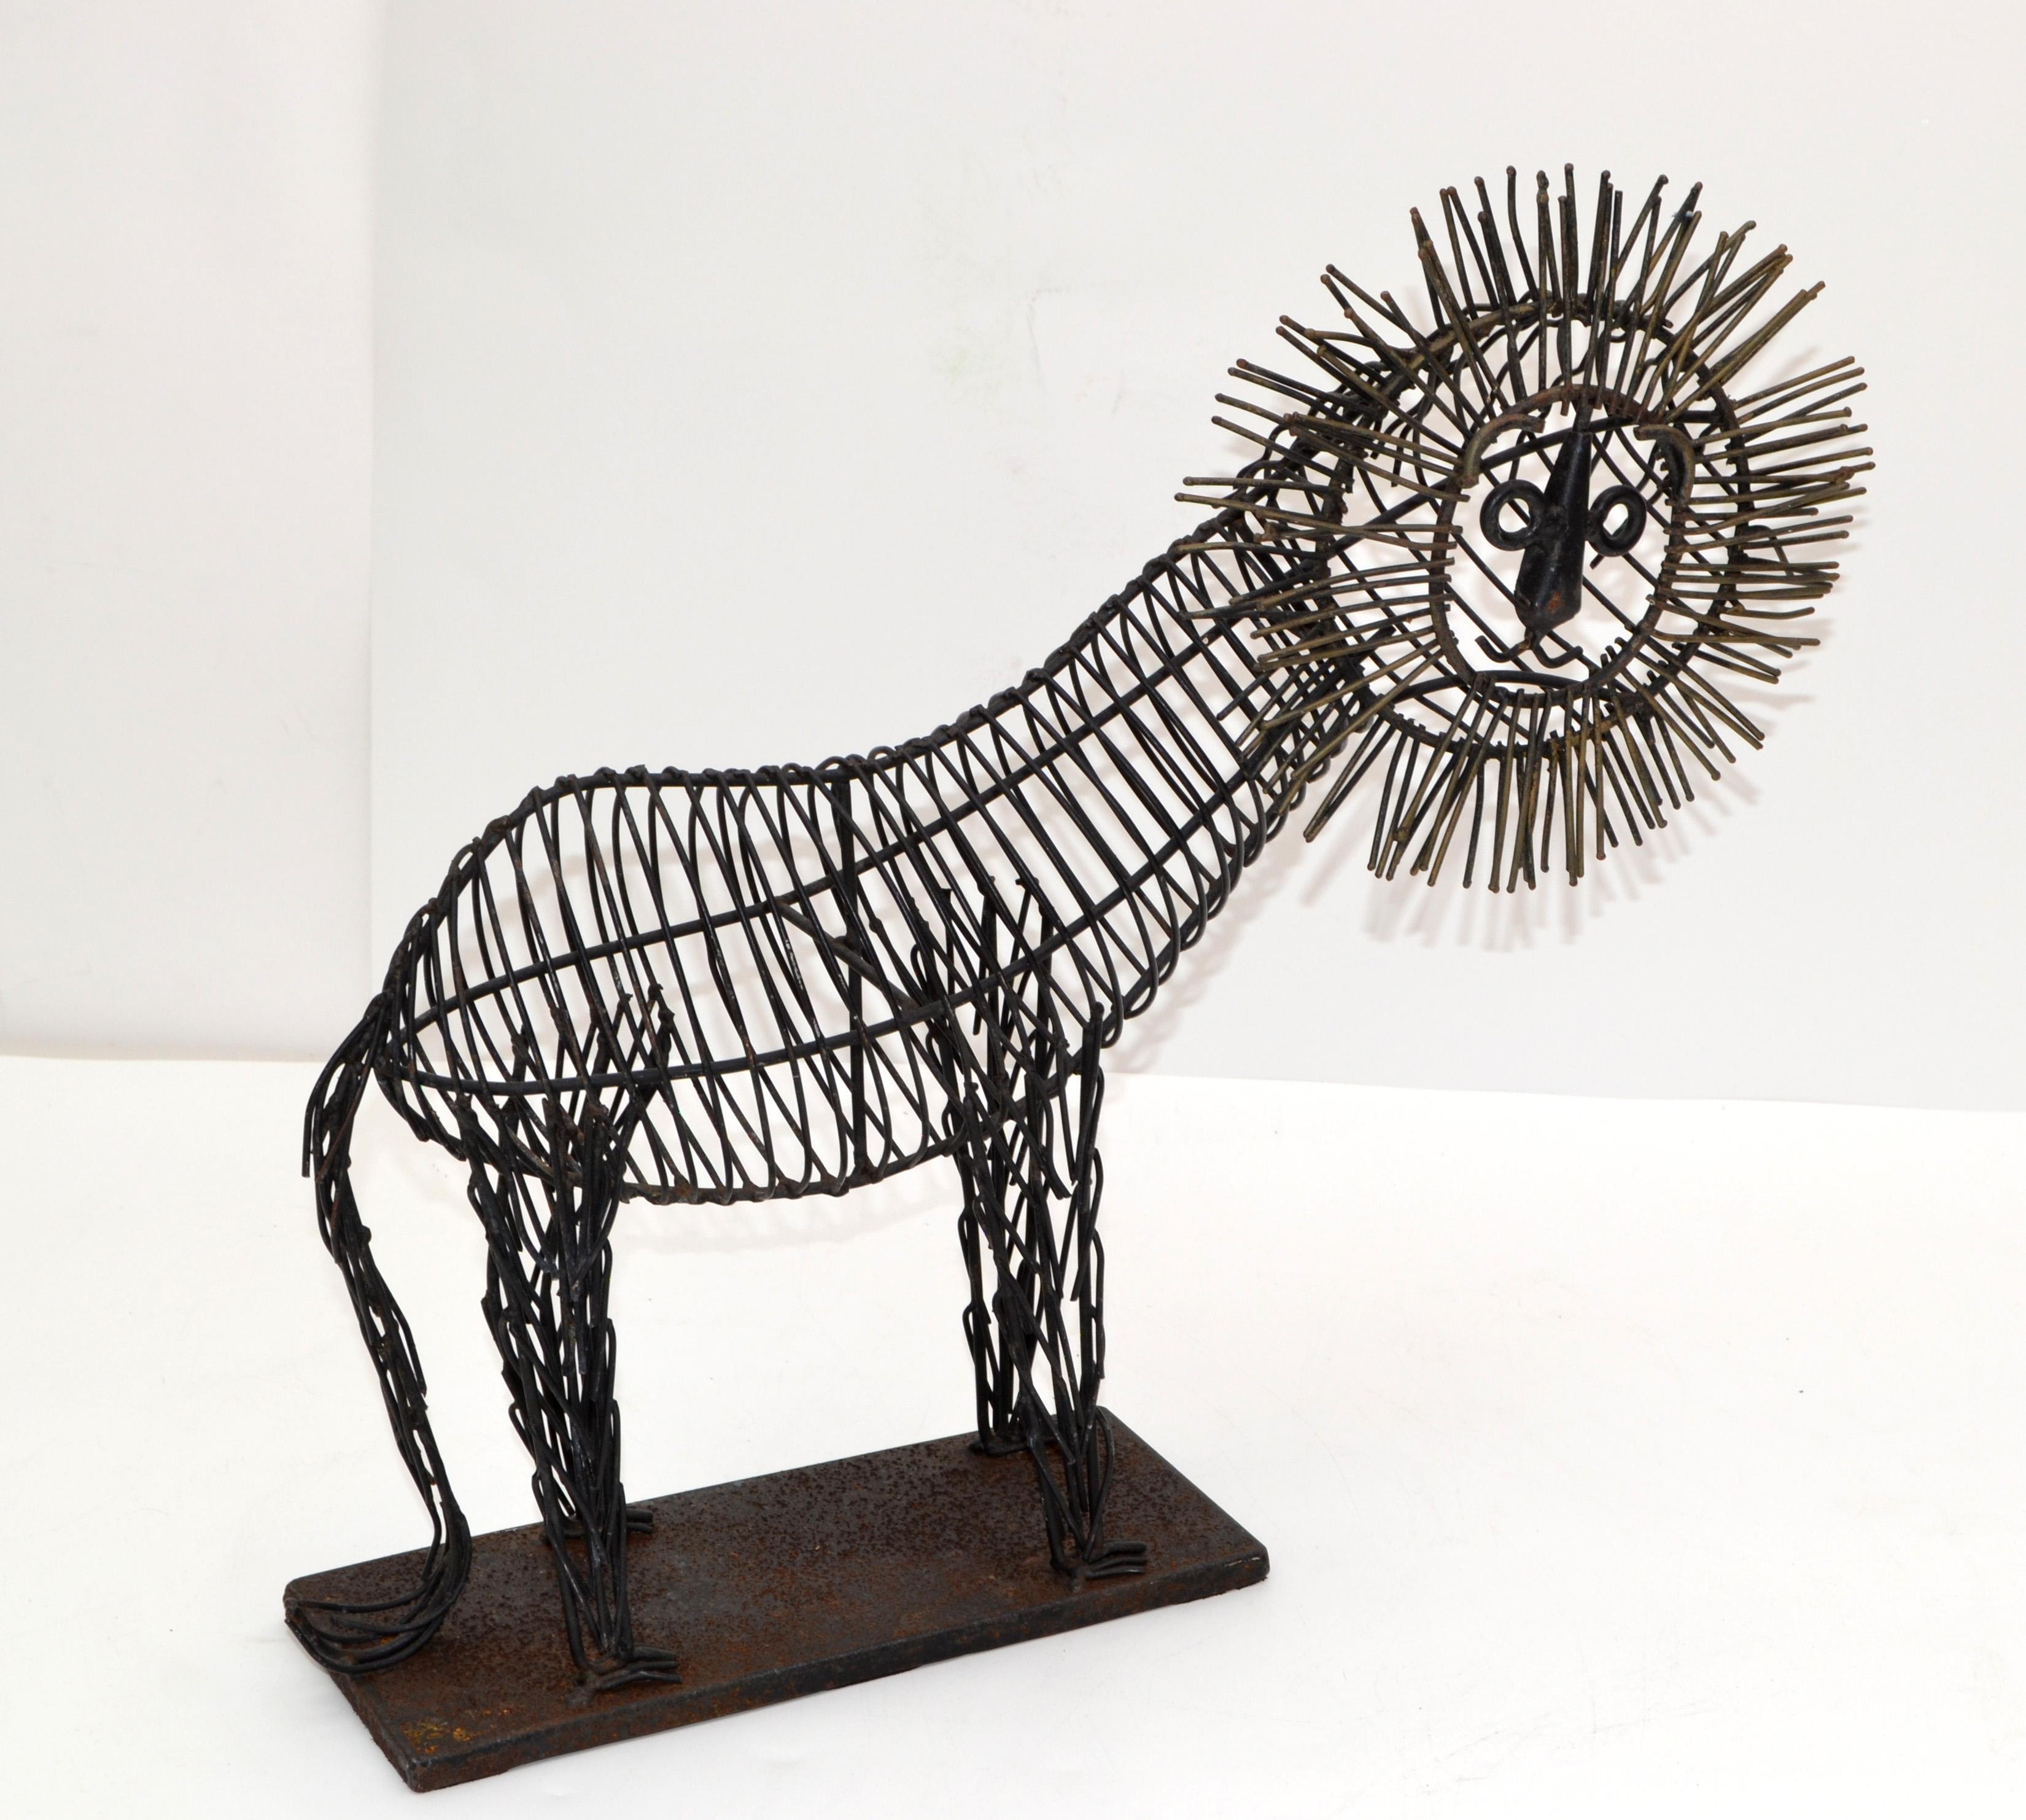 Black Mid-Century Modern wire metal lion sculpture, Fine Art, animal sculpture.
The lion is mounted on a metal base.
Felt cover underneath.
  